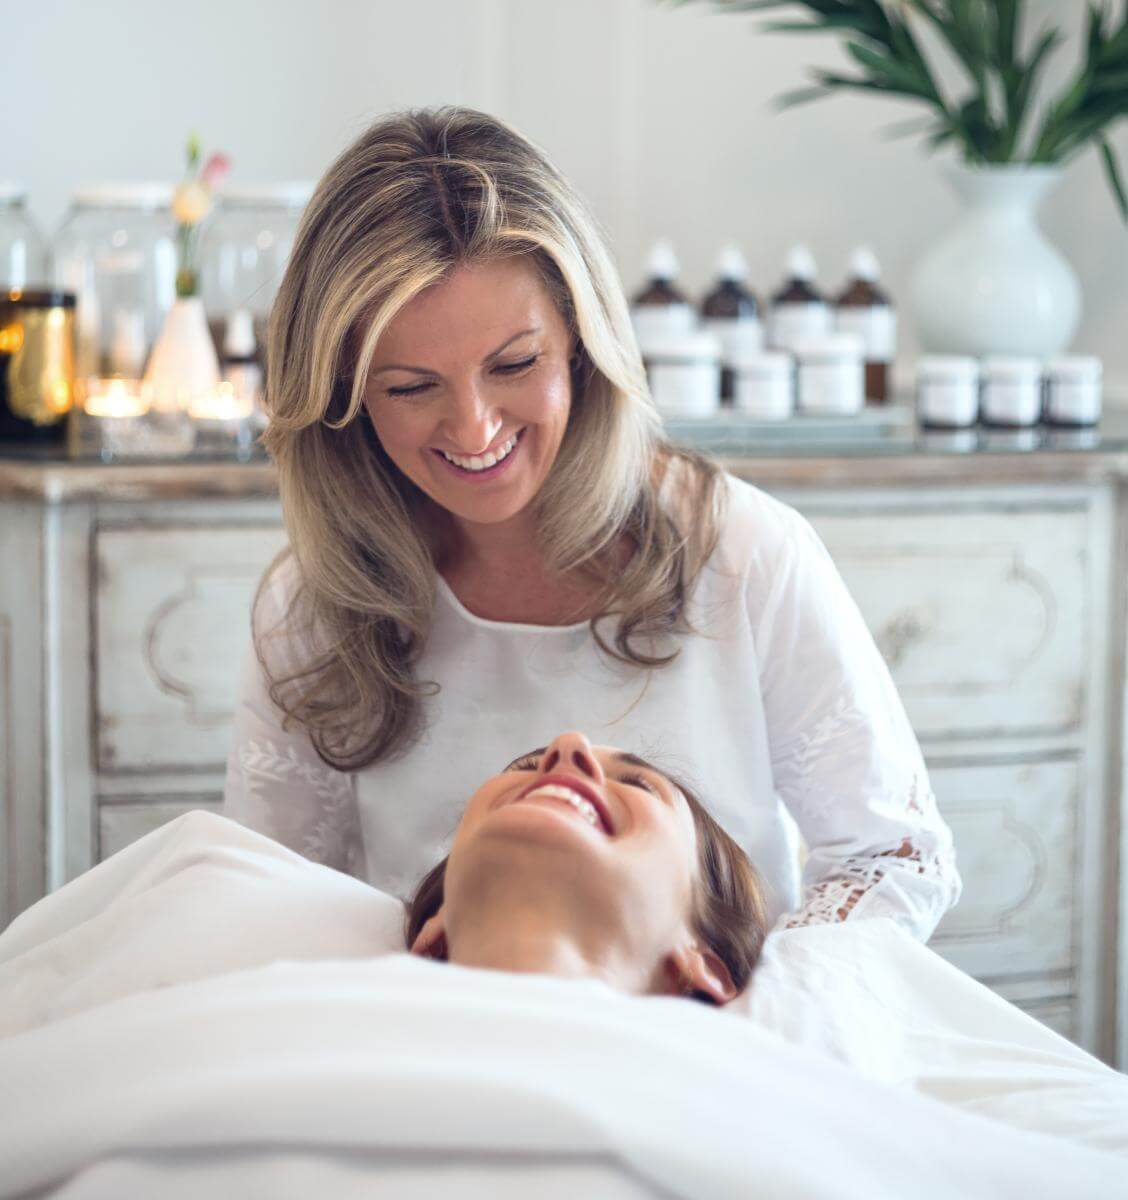 Woman providing a spa service to another woman